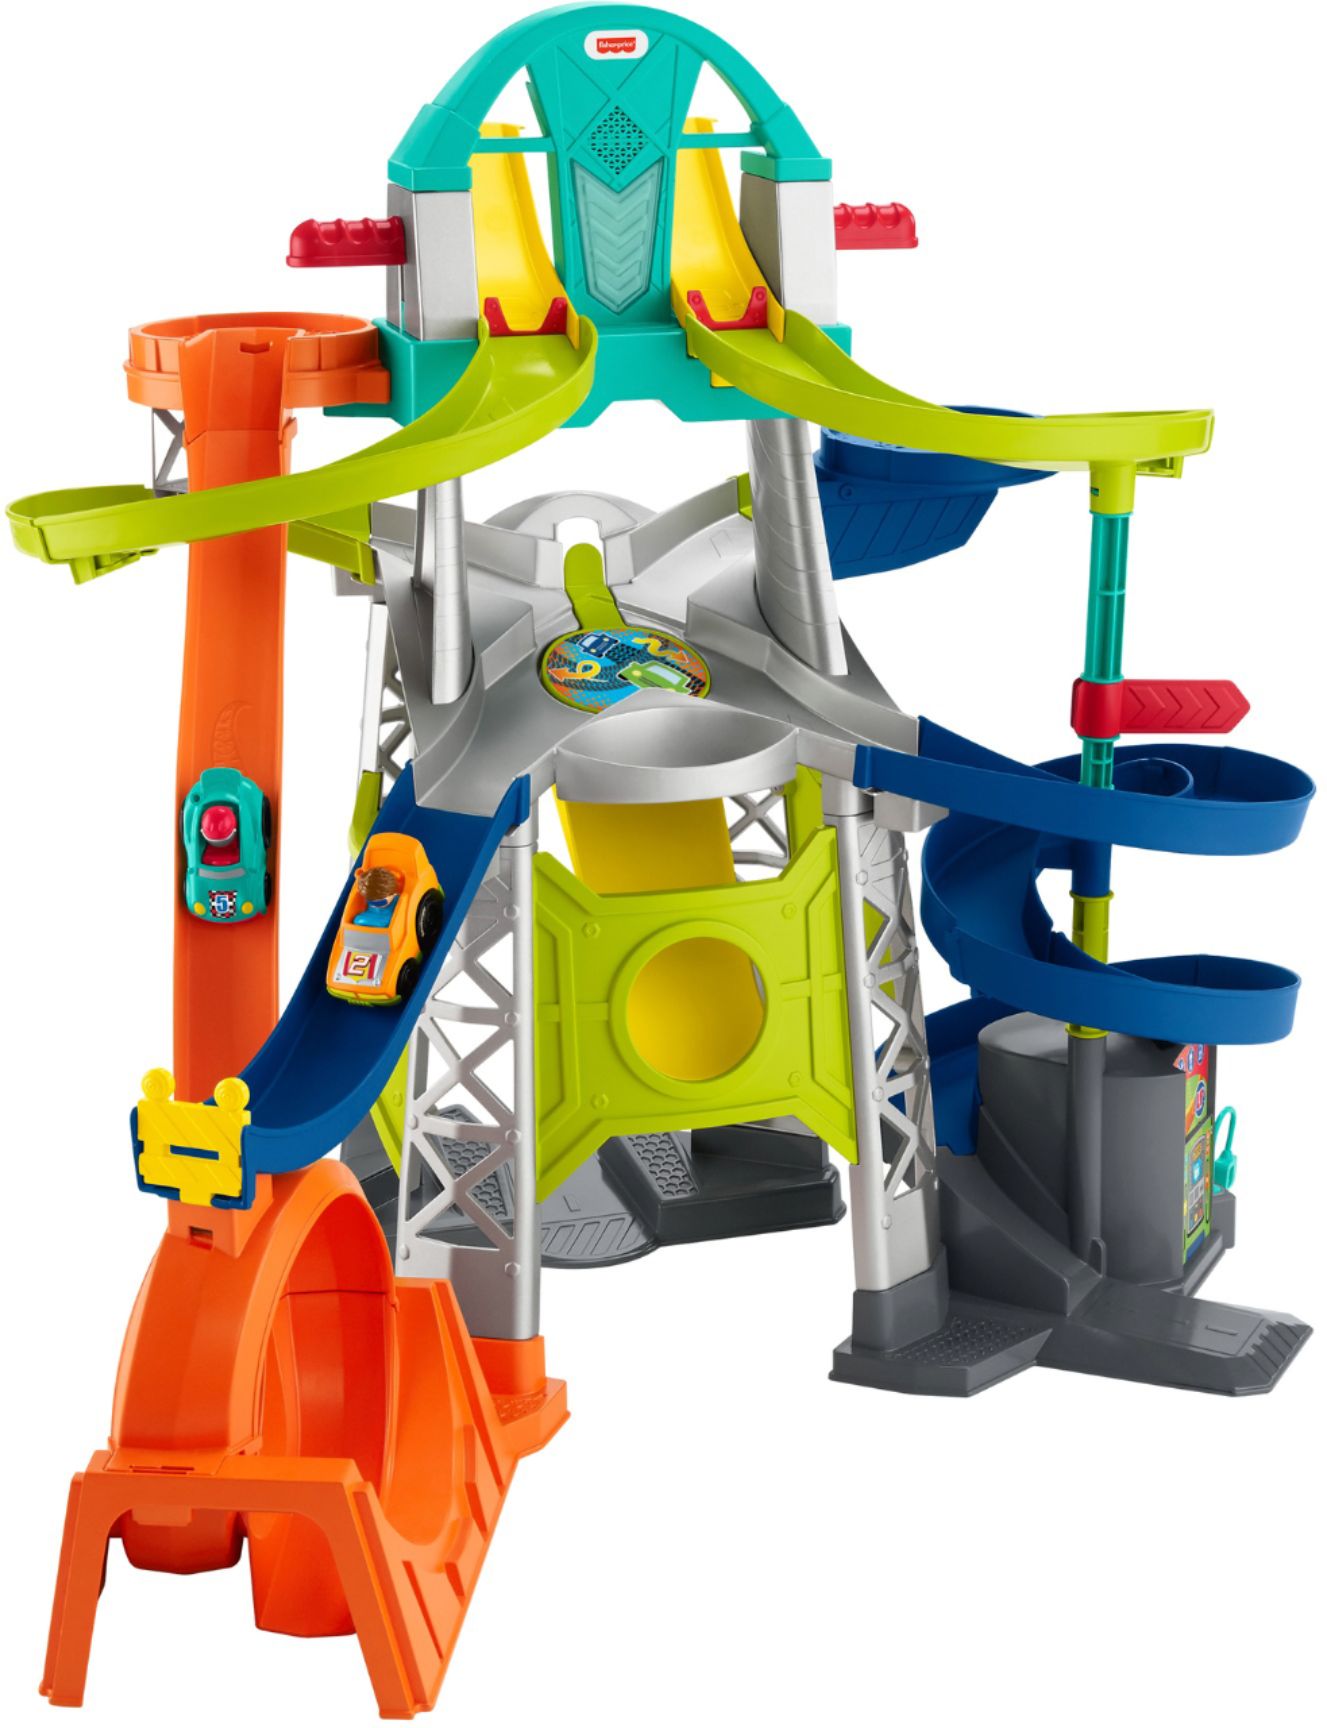 Little People Launch & Loop Raceway Early Black Friday Deal at Best Buy!